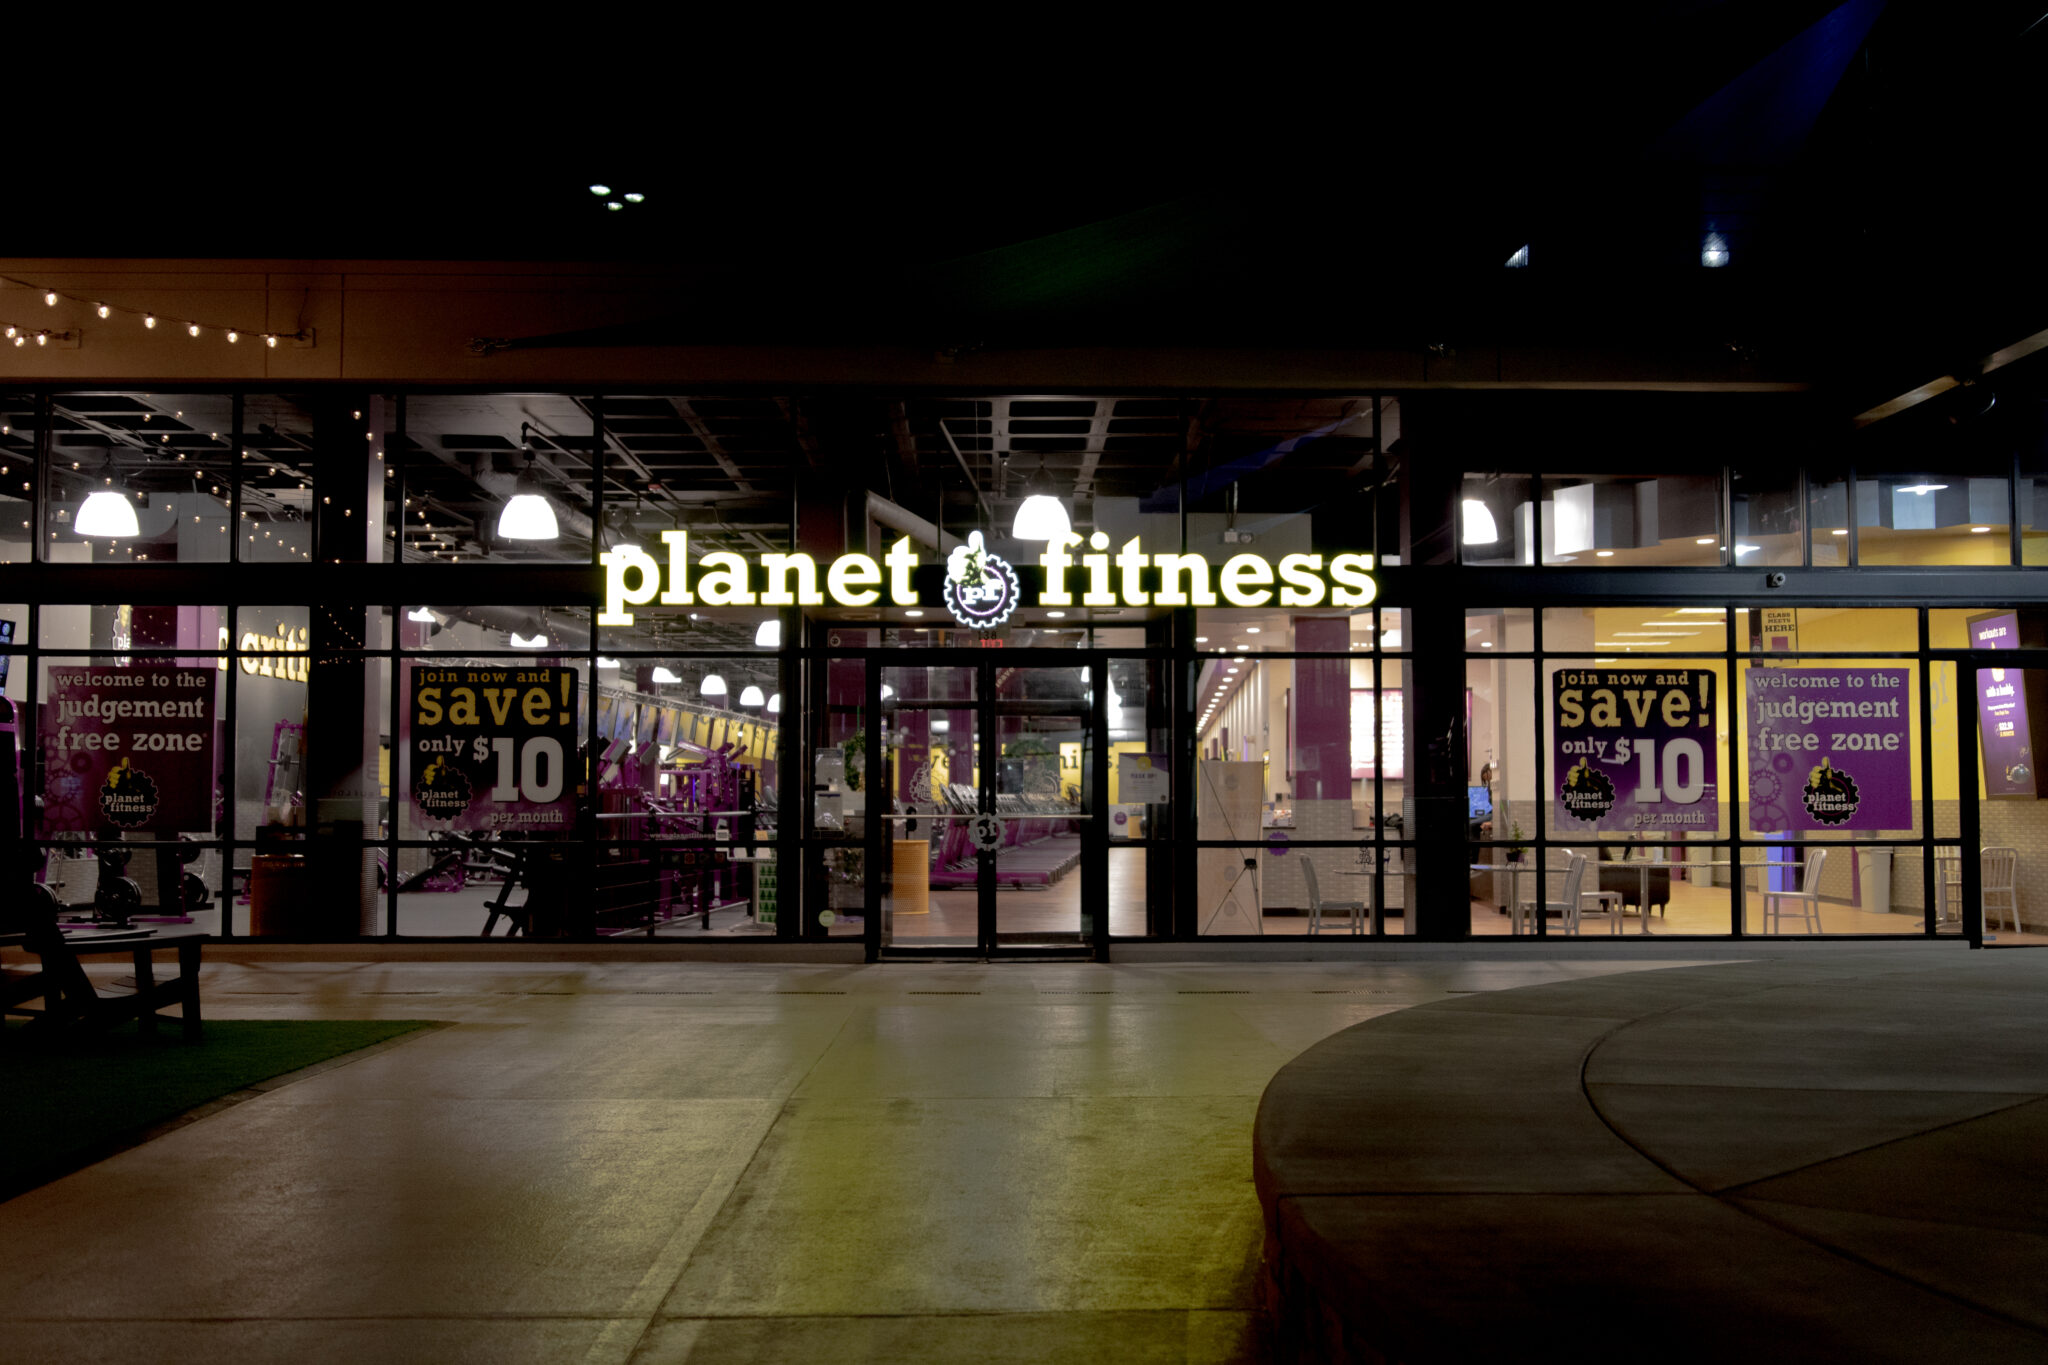 Planet Fitness 2 The early bird's guide to Birmingham—find out what's open before 7AM